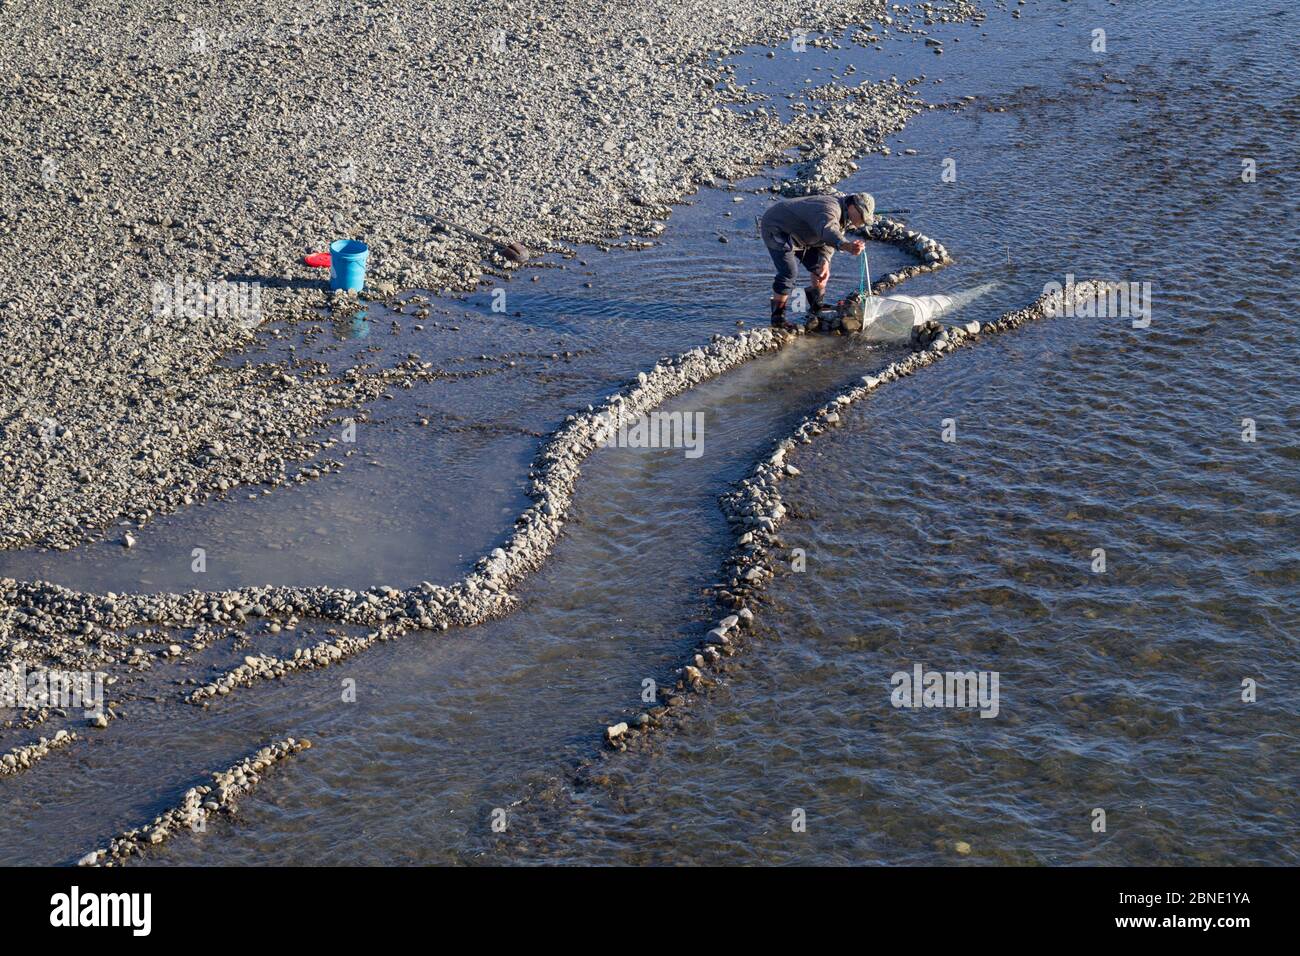 Fisherman using a hand-net to catch New Zealand whitebait, the juvenile form of five species of Galaxiidae fish, considered a delicacy, Tuki Tuki Rive Stock Photo